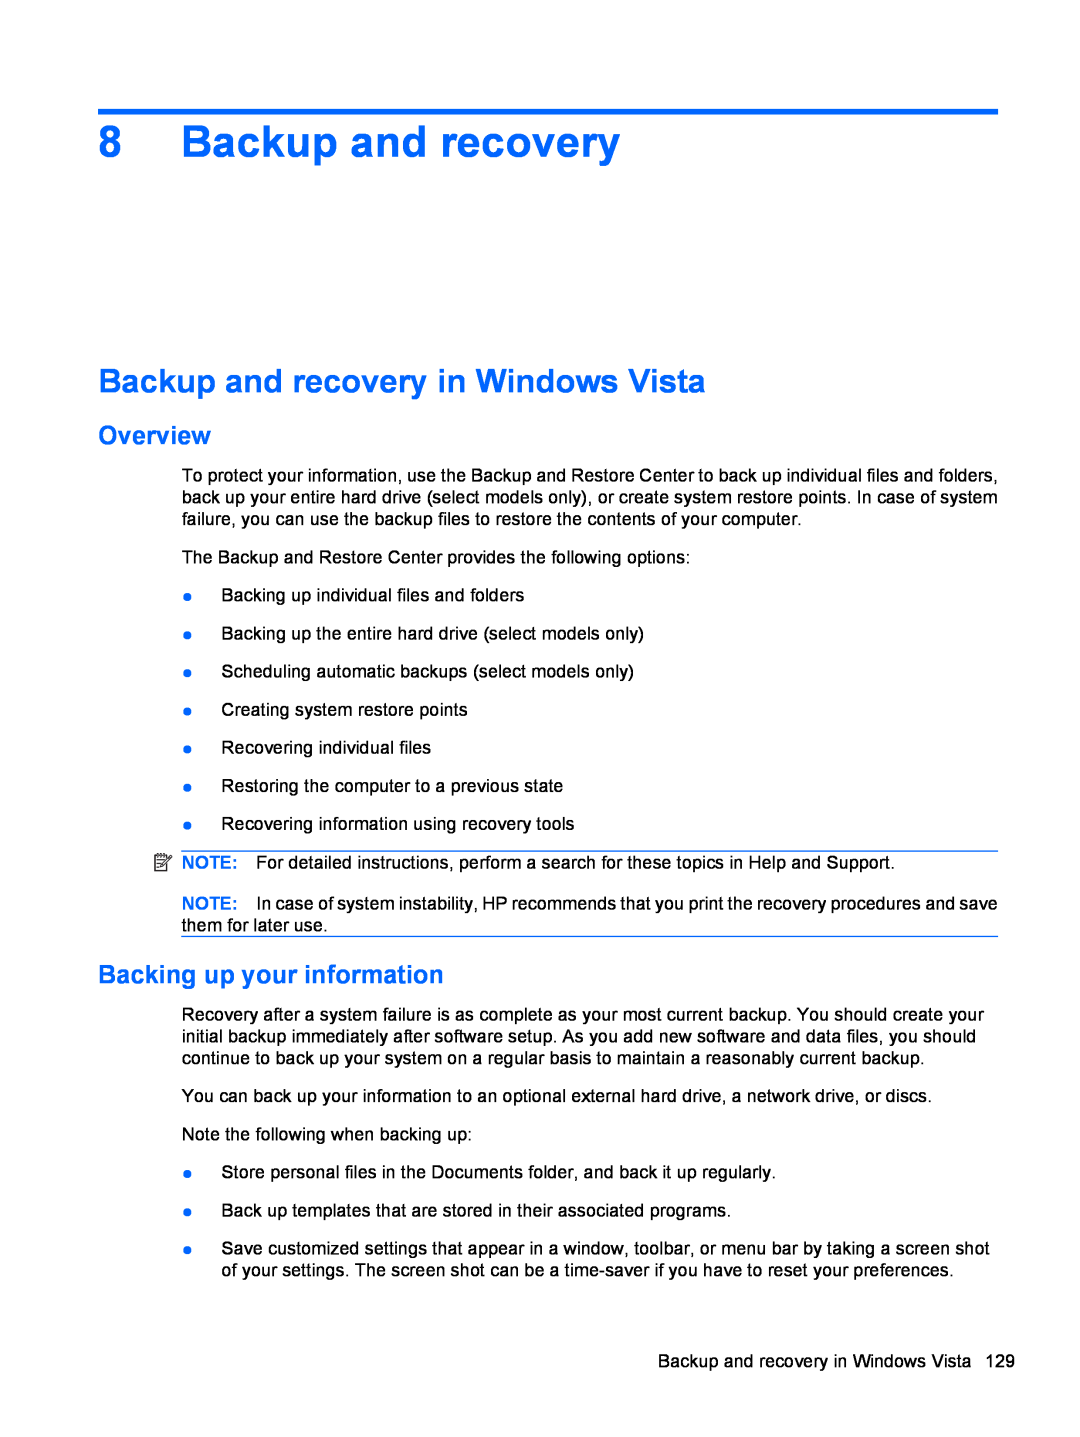 HP FN037UAABA, FN038UAABA manual Backup and recovery in Windows Vista, Overview, Backing up your information 